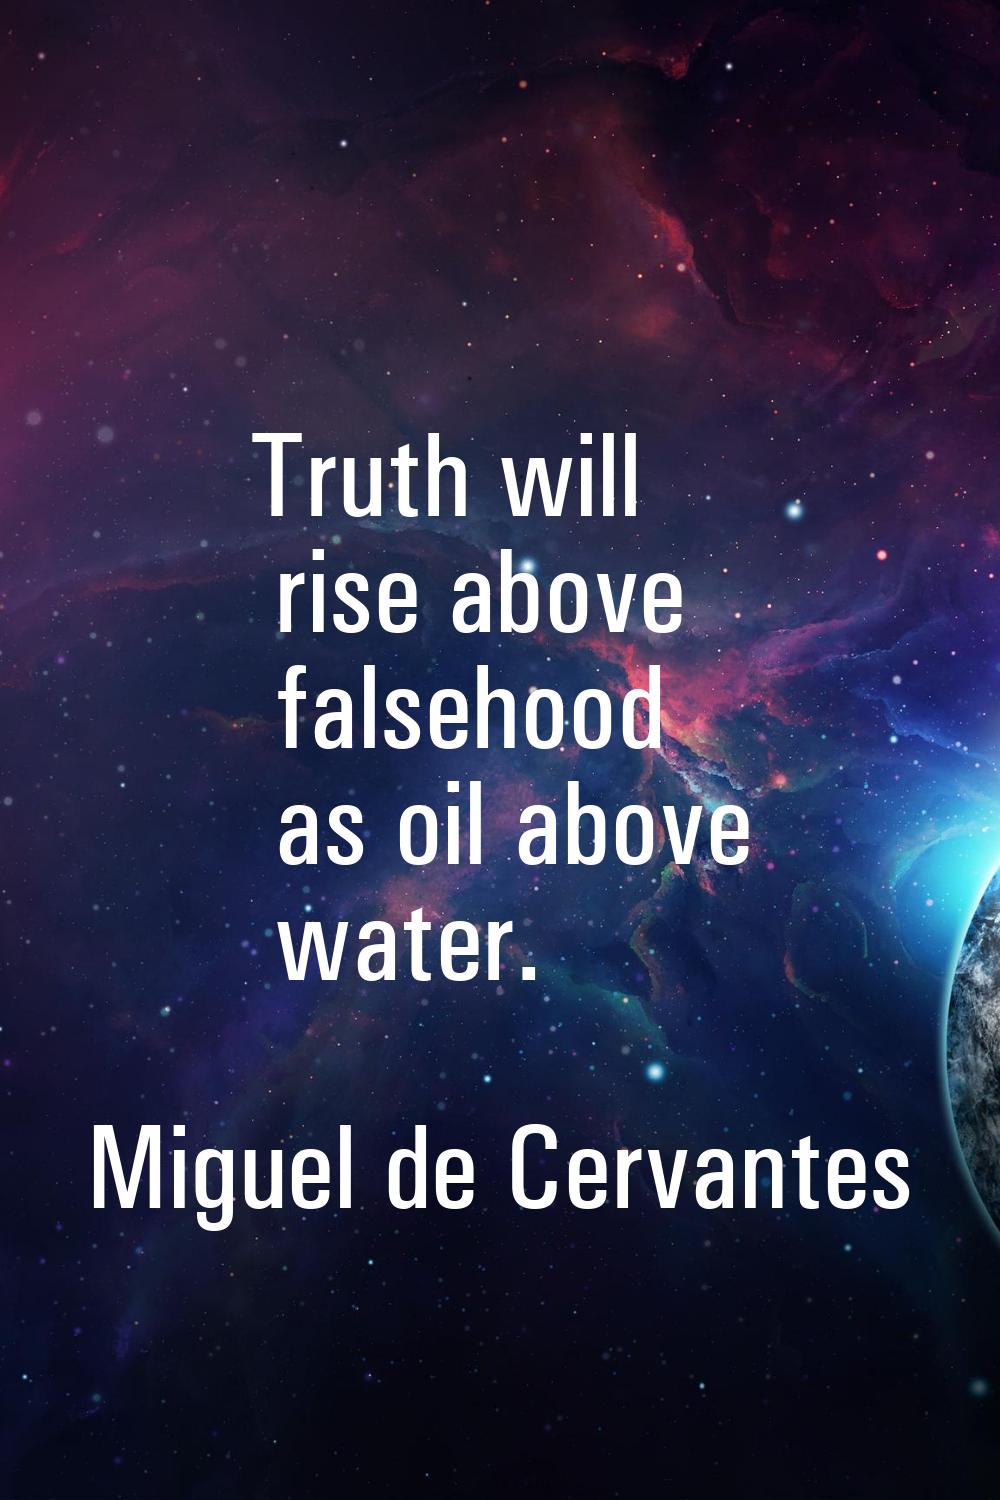 Truth will rise above falsehood as oil above water.